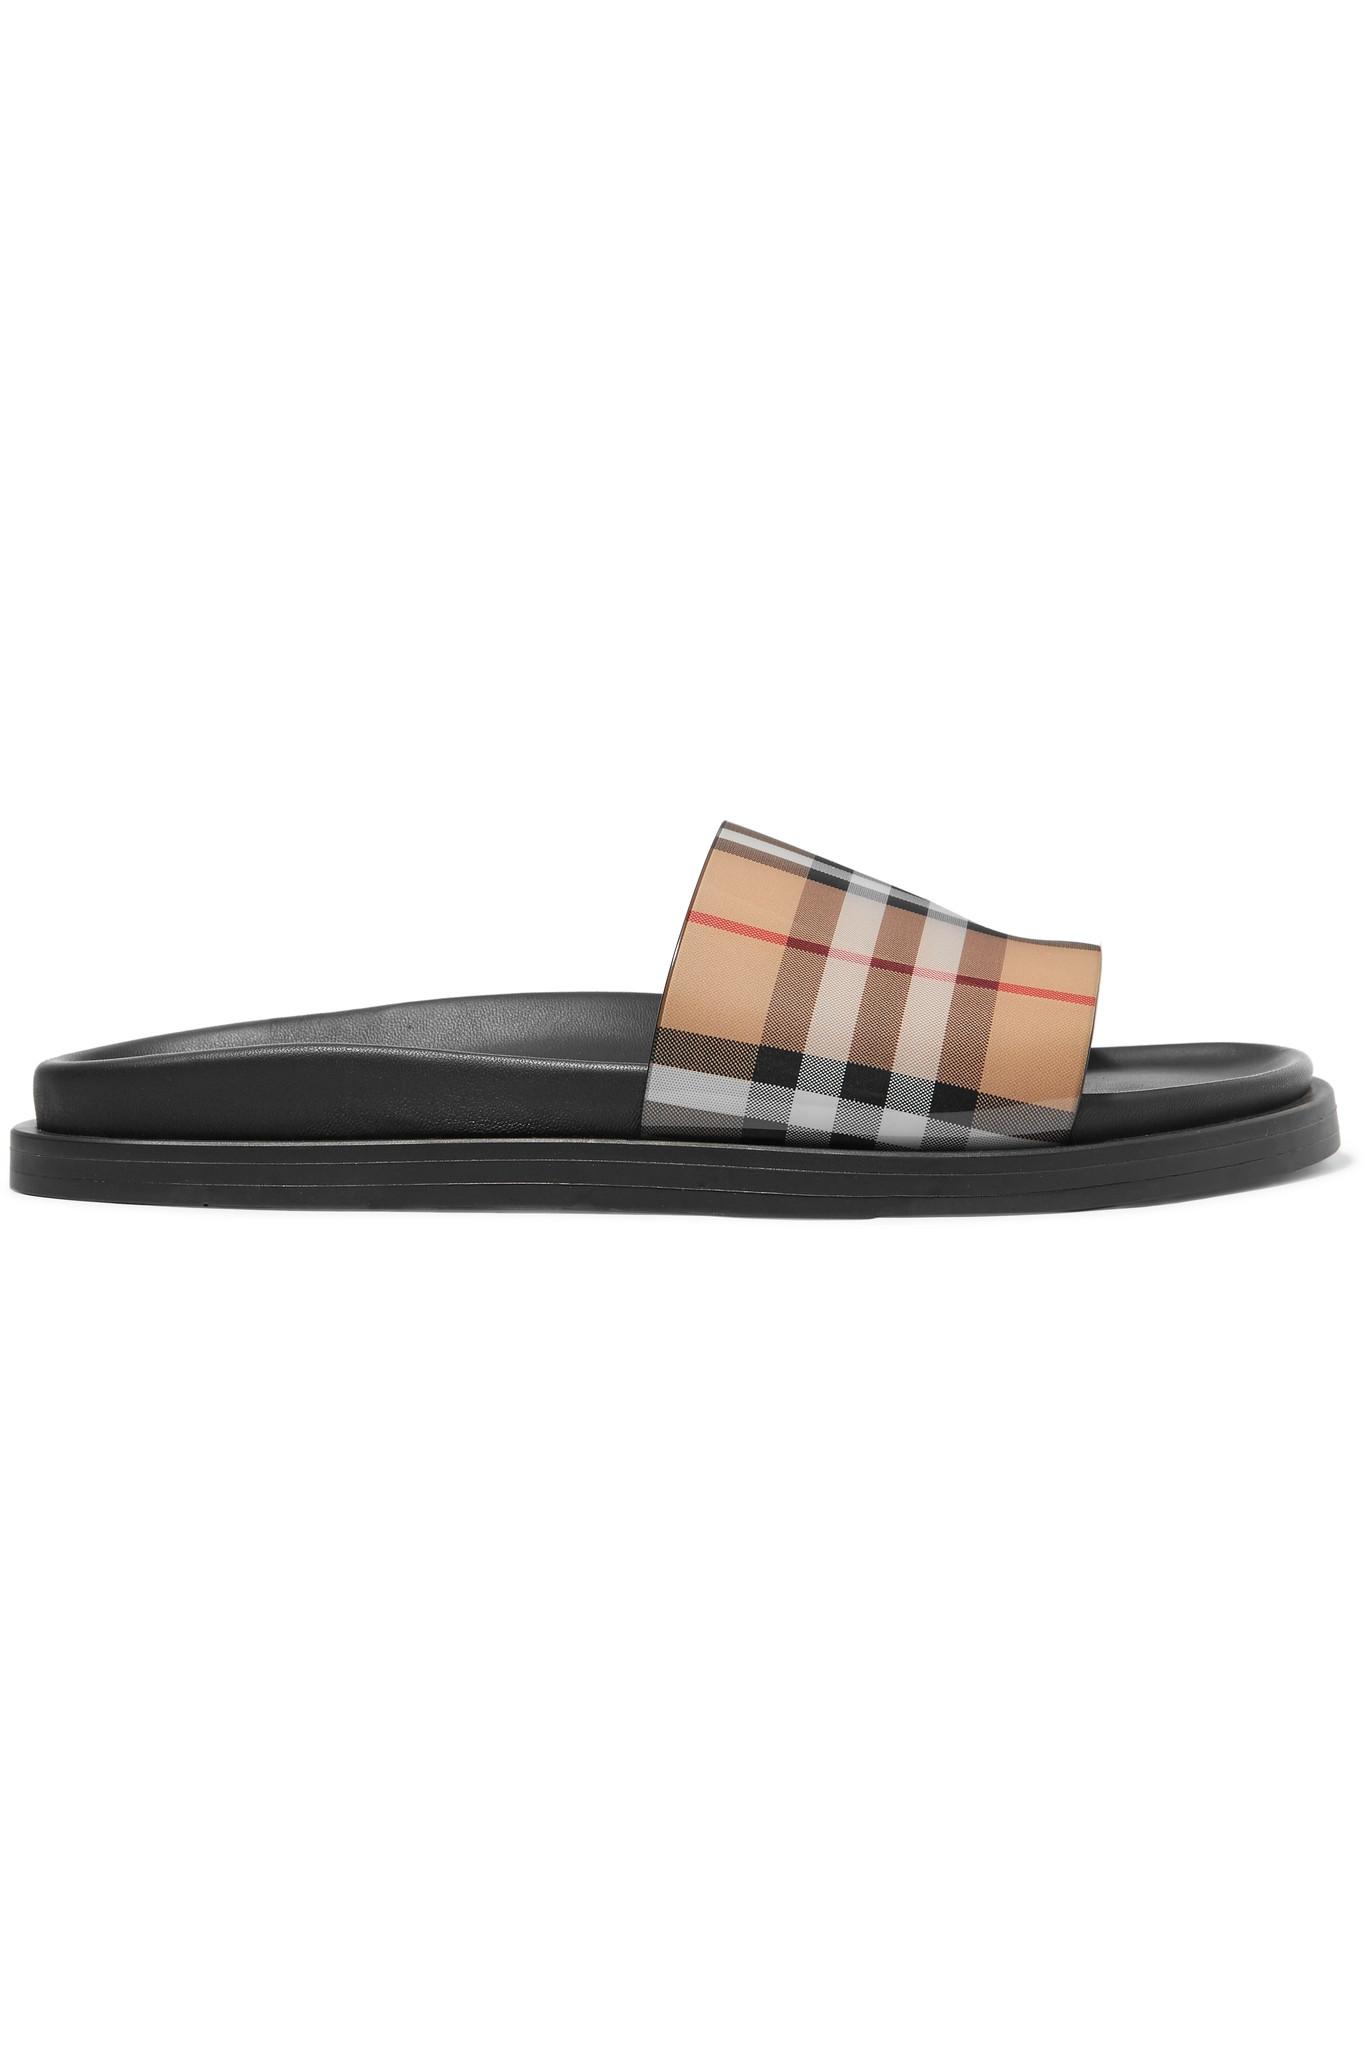 Burberry Vintage Check And Leather Slides in Antique Yellow (Black 